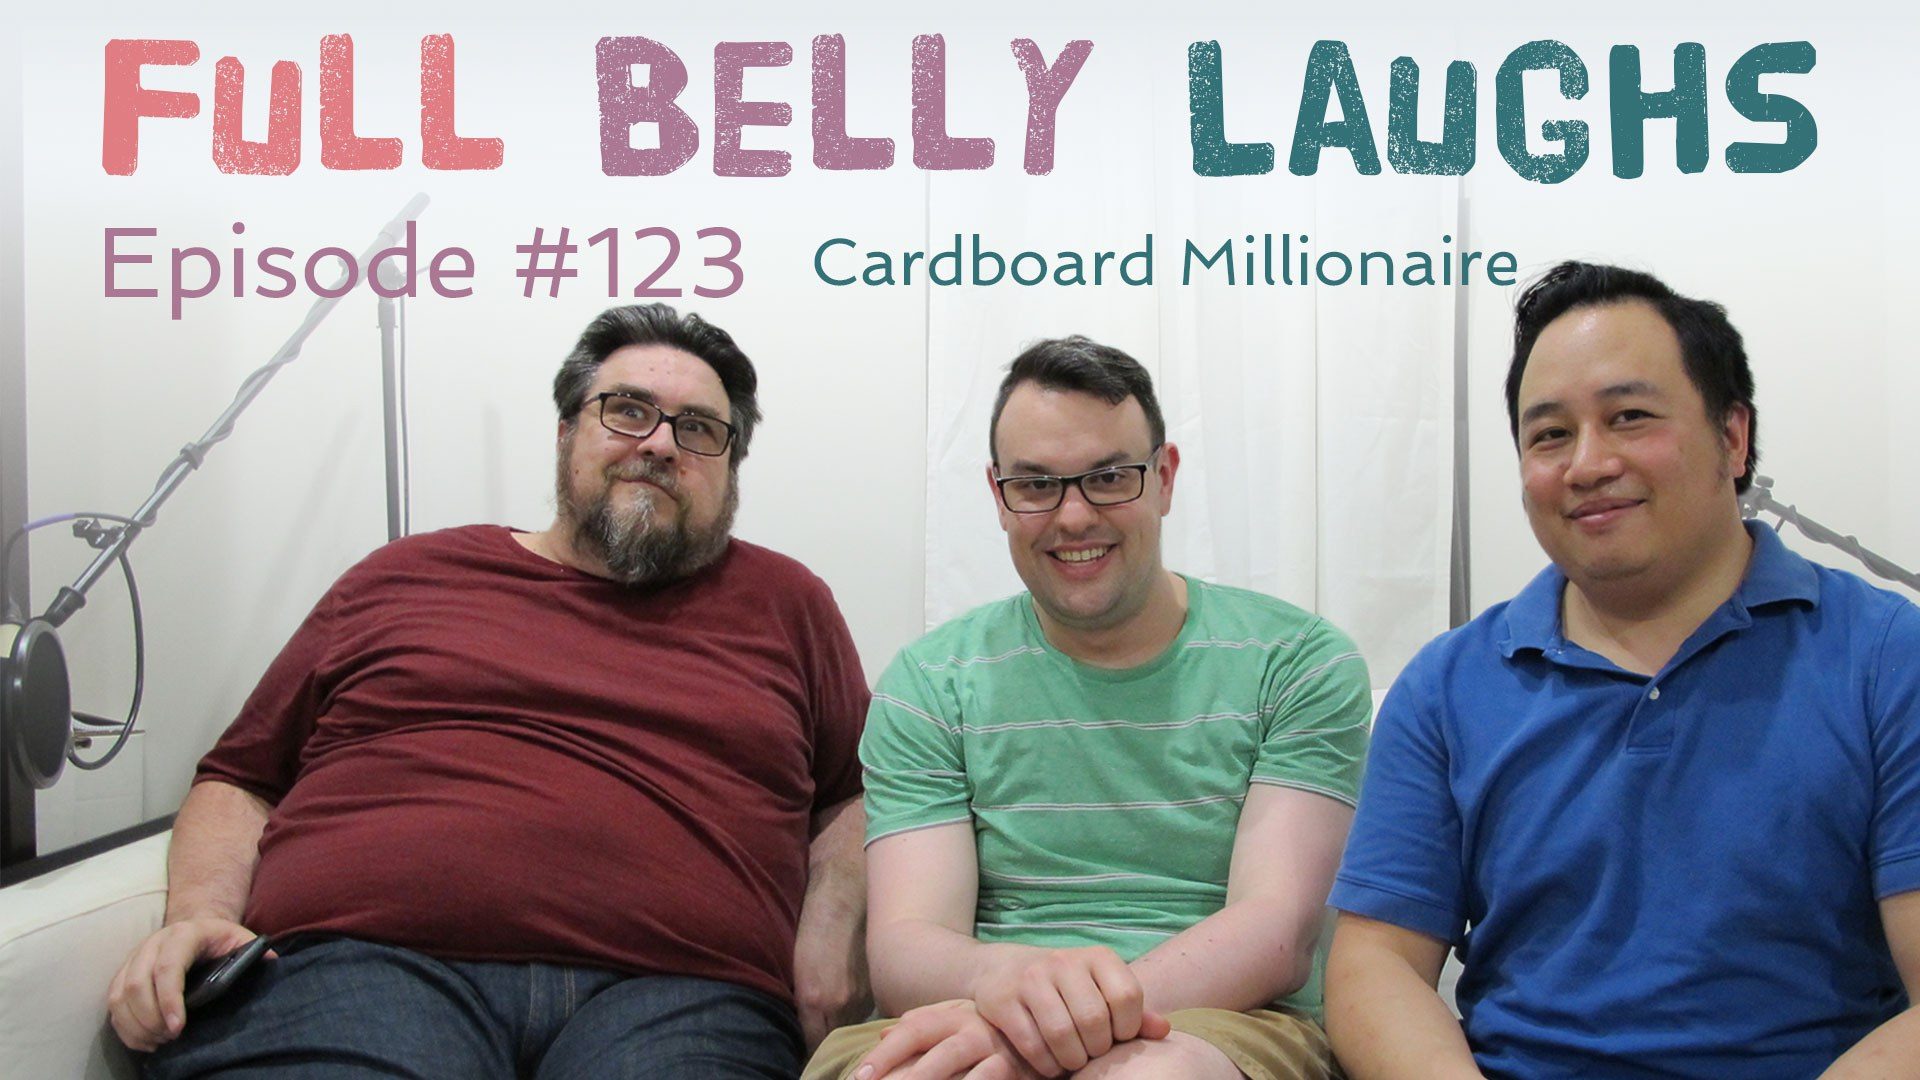 full belly laughs podcast episode 123 cryptocurrency cardboard economy audio artwork